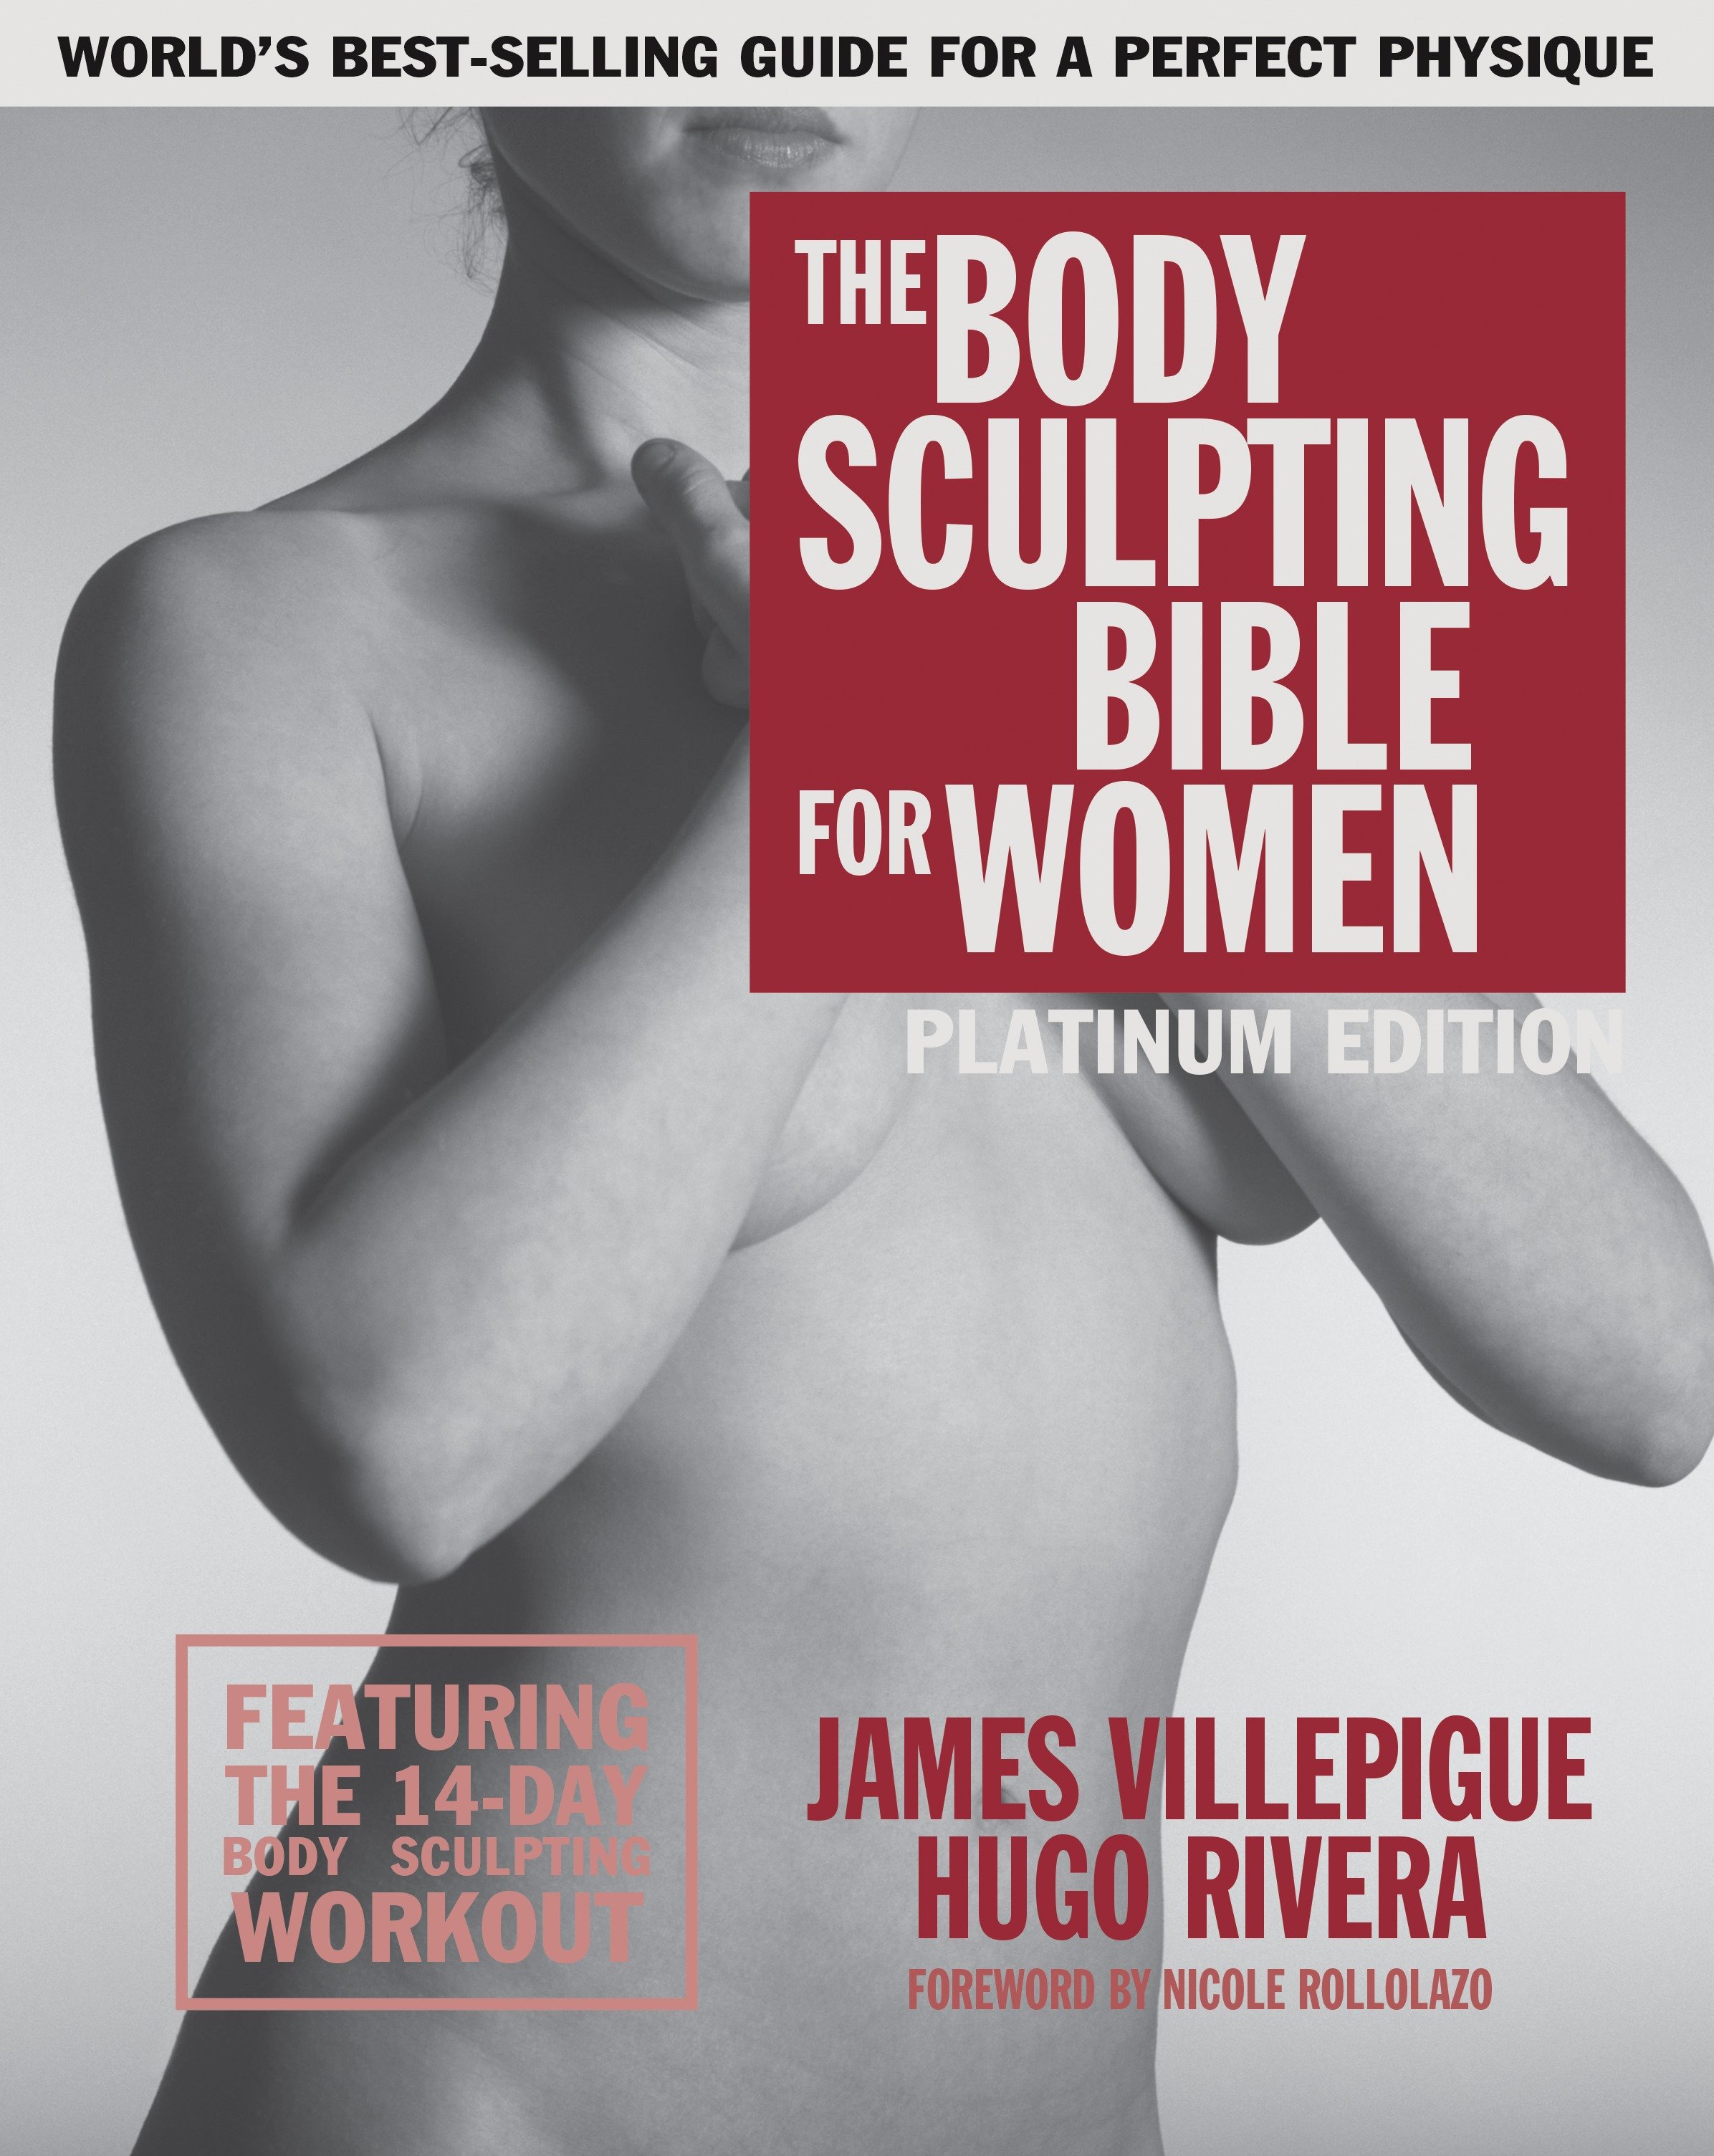 The body sculpting bible for women cover image